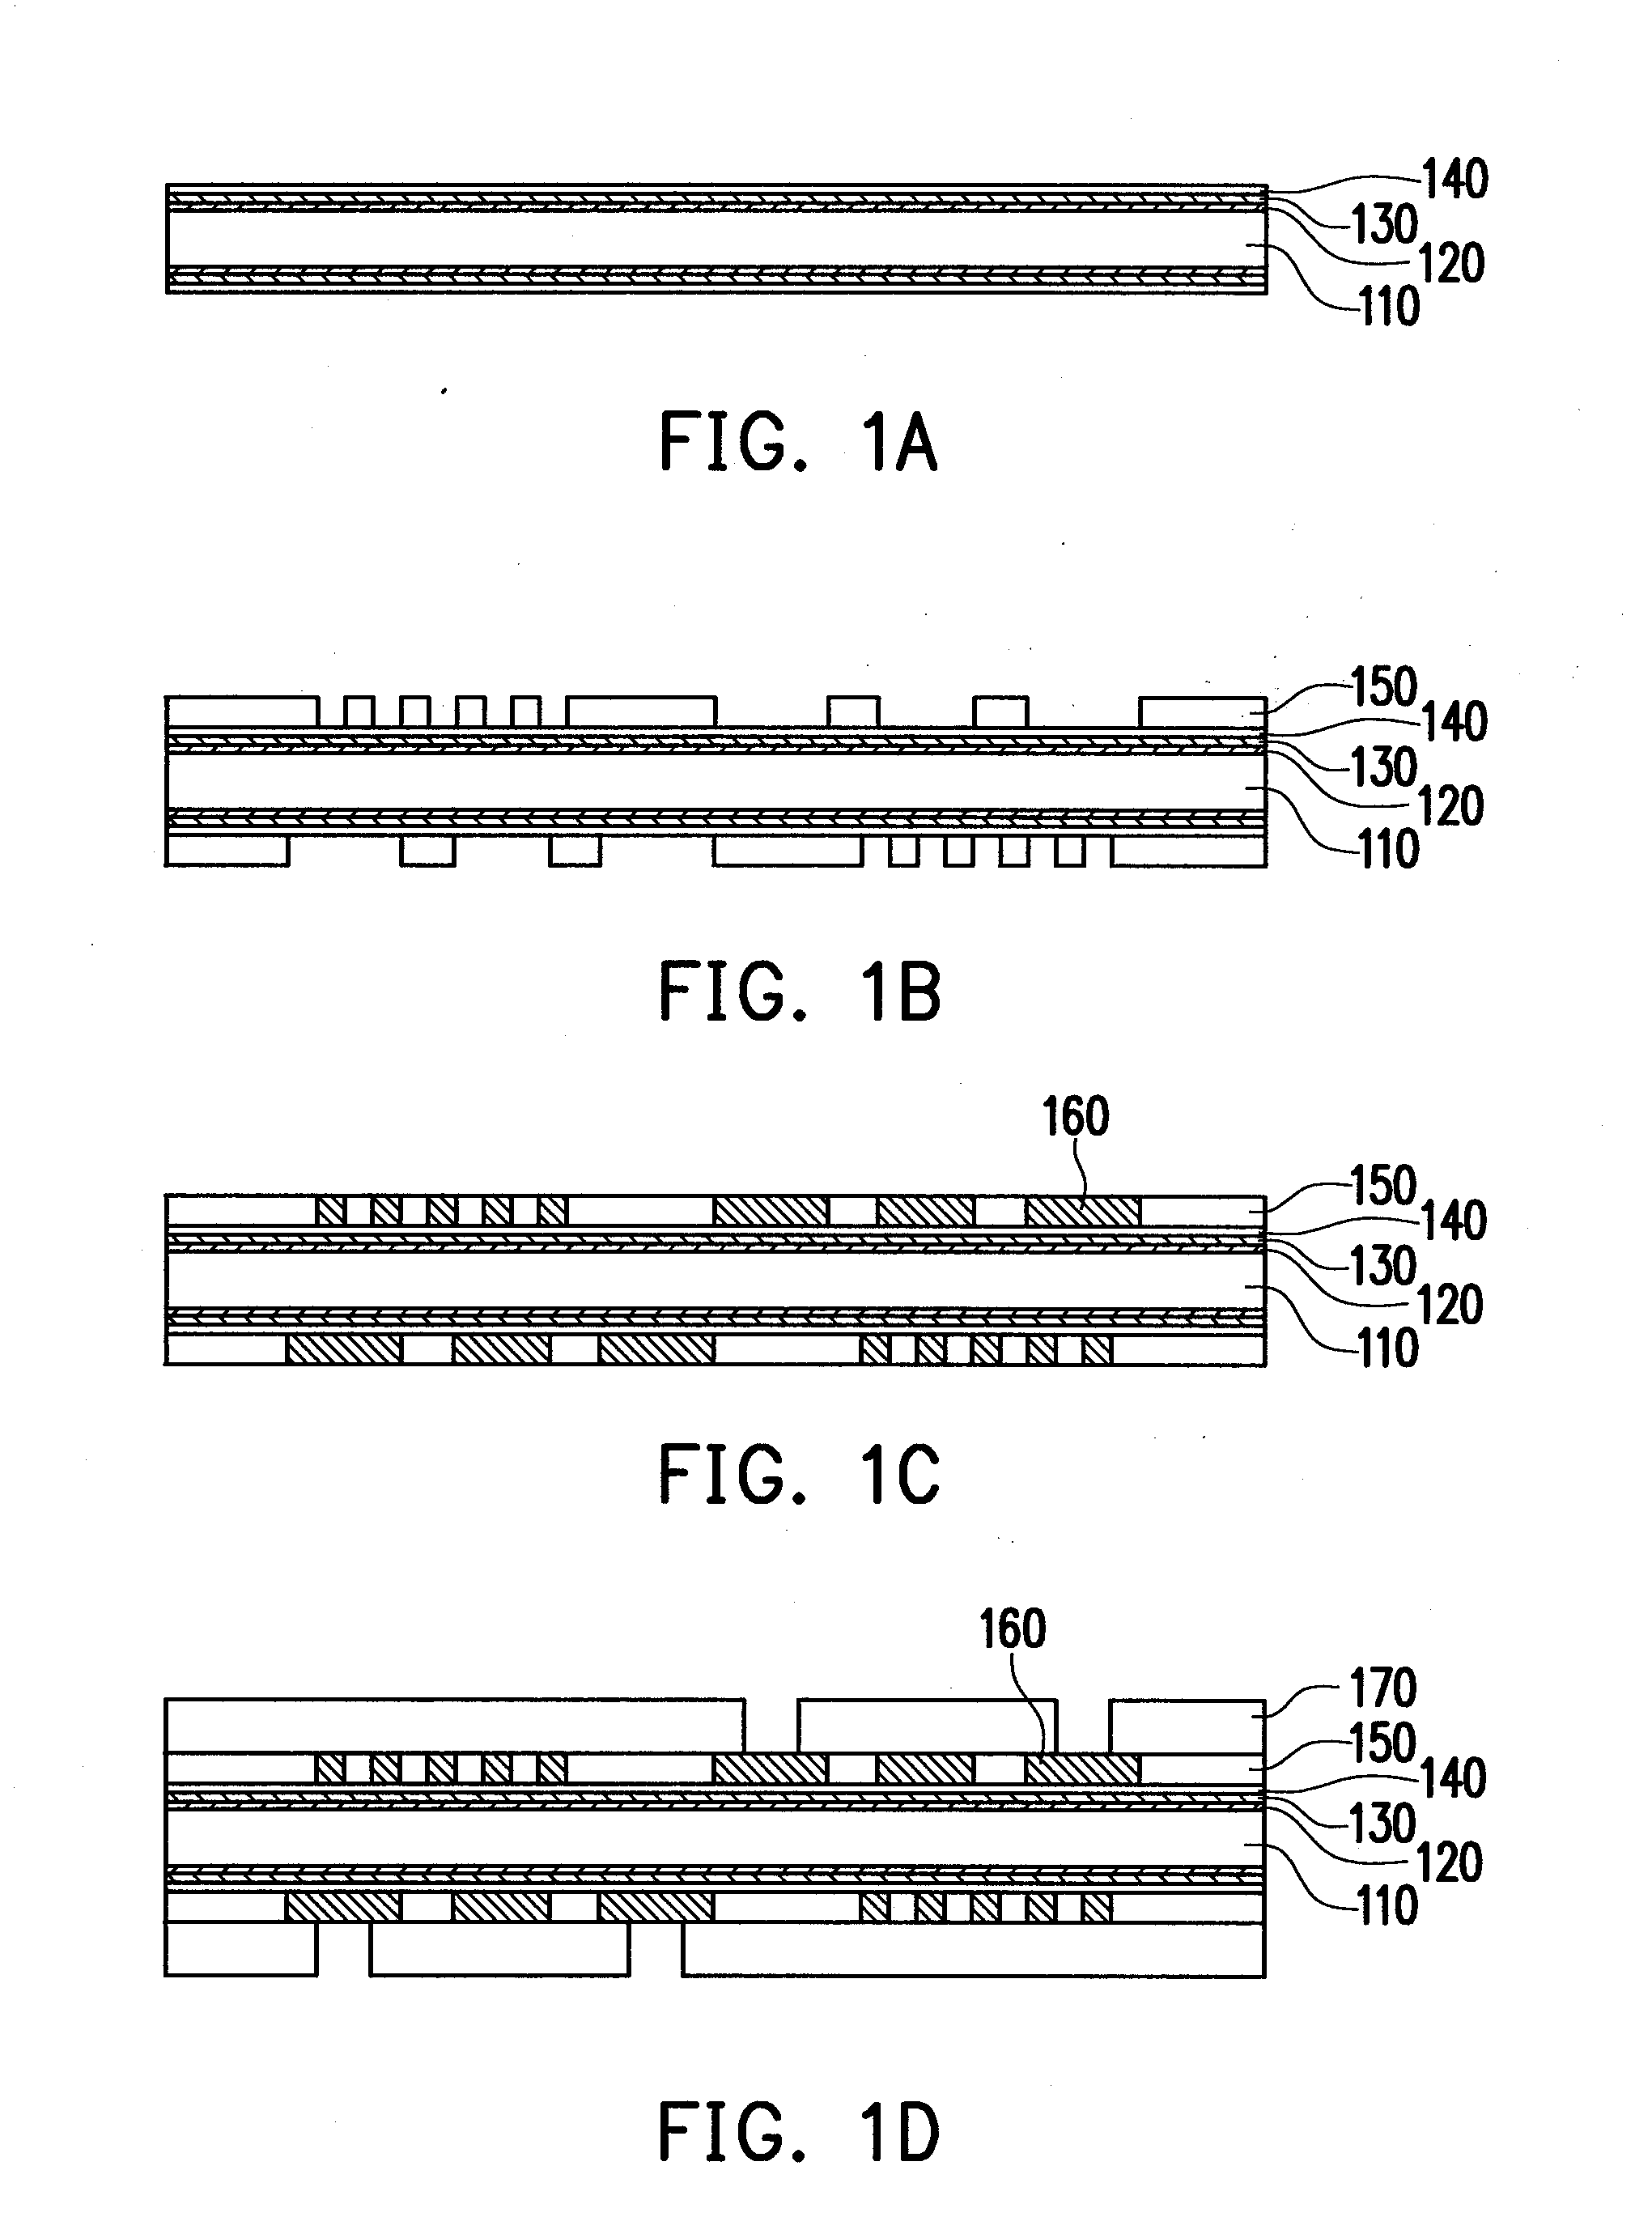 Embedded circuit substrate and manufacturing method thereof